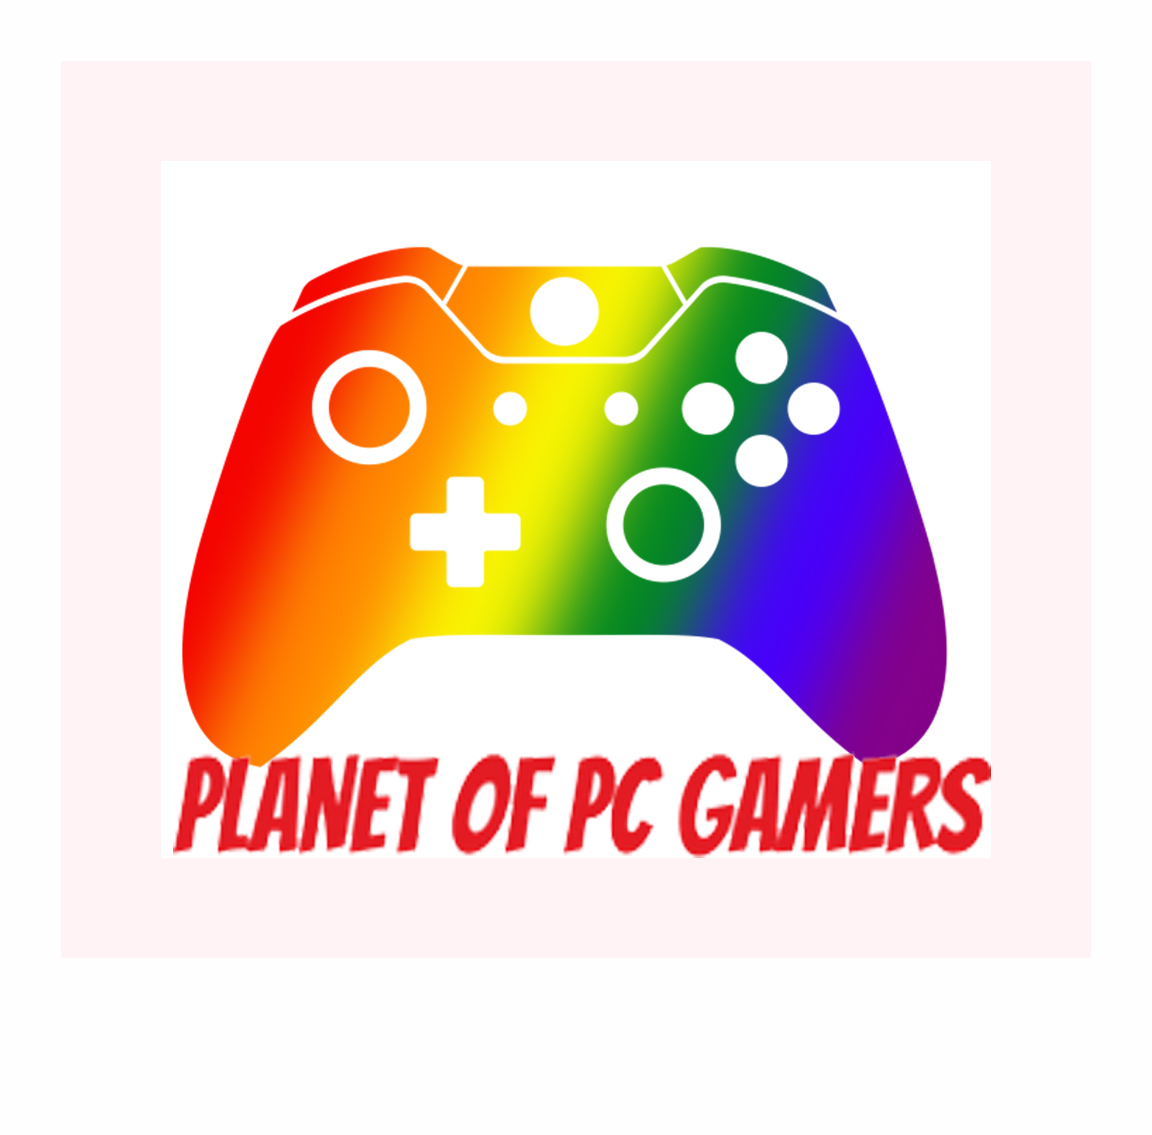 PLANET OF PC GAMERS